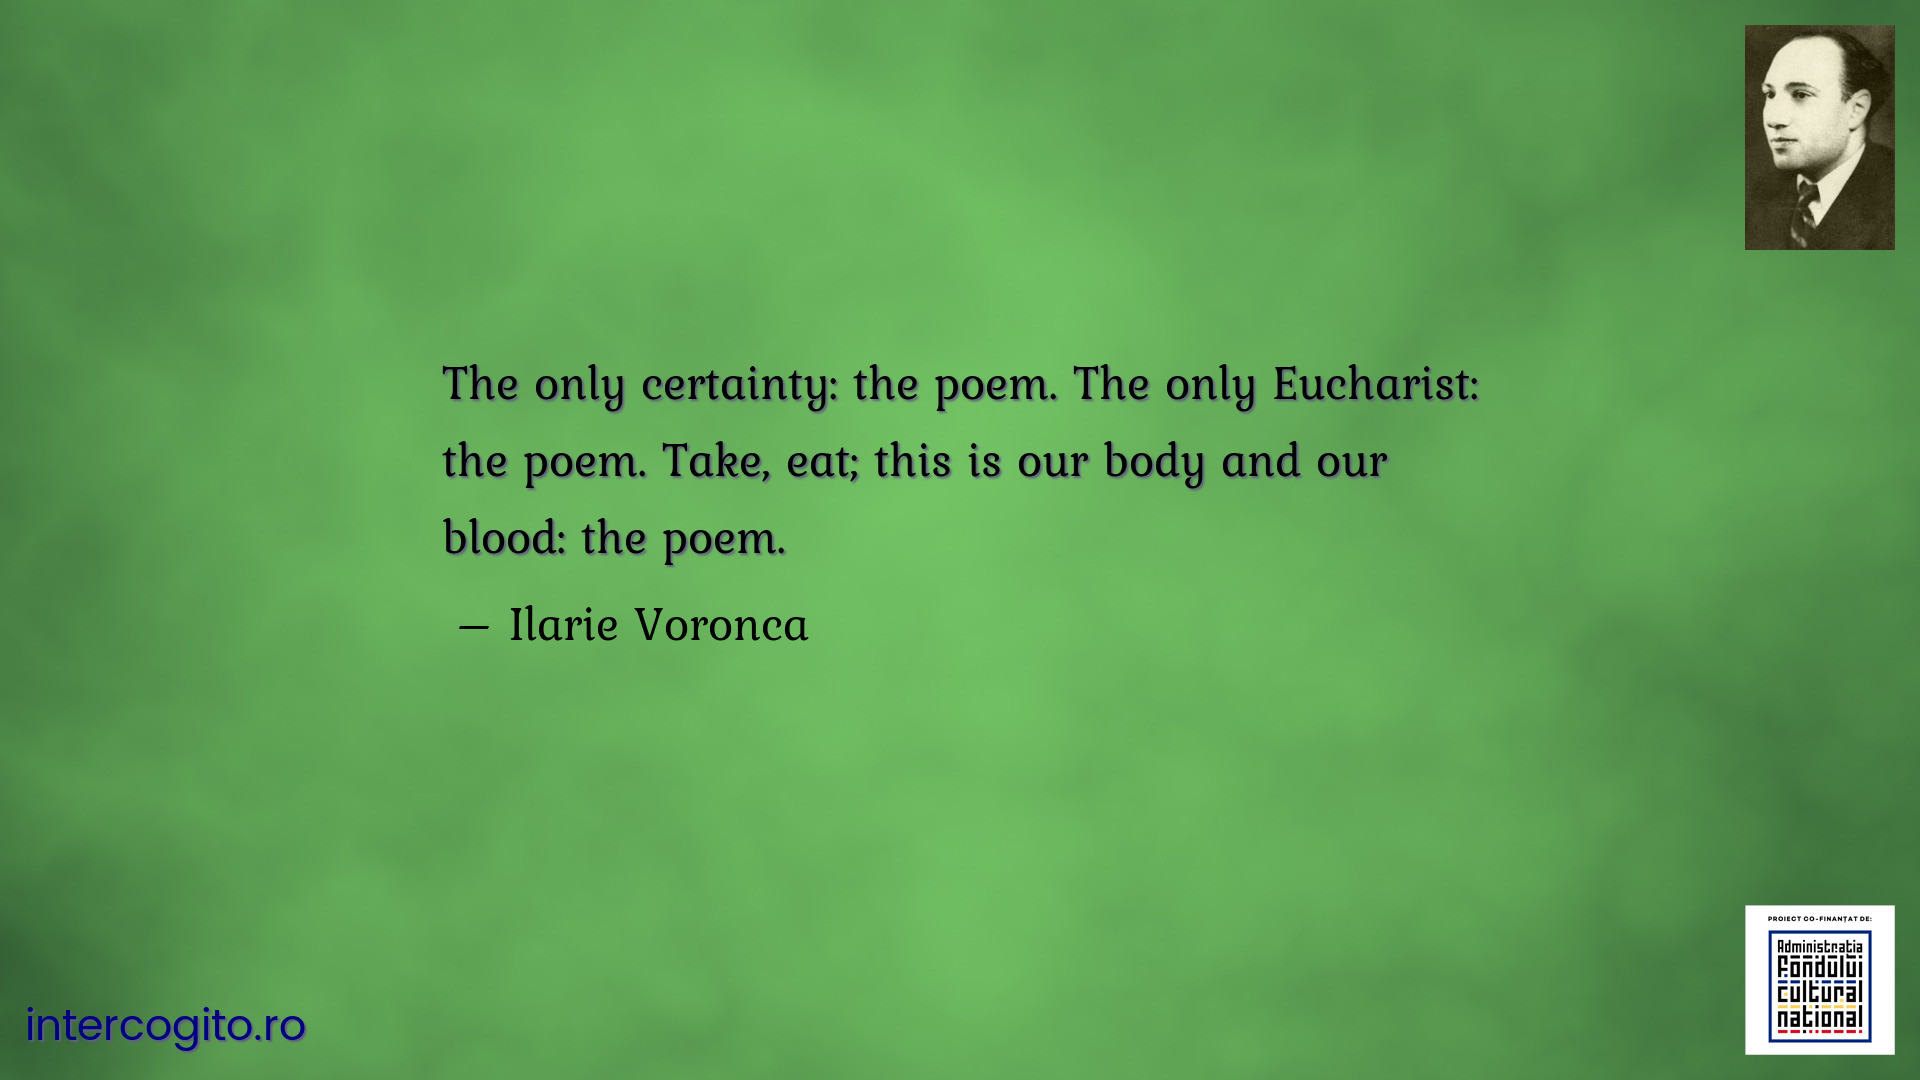 The only certainty: the poem. The only Eucharist: the poem. Take, eat; this is our body and our blood: the poem.